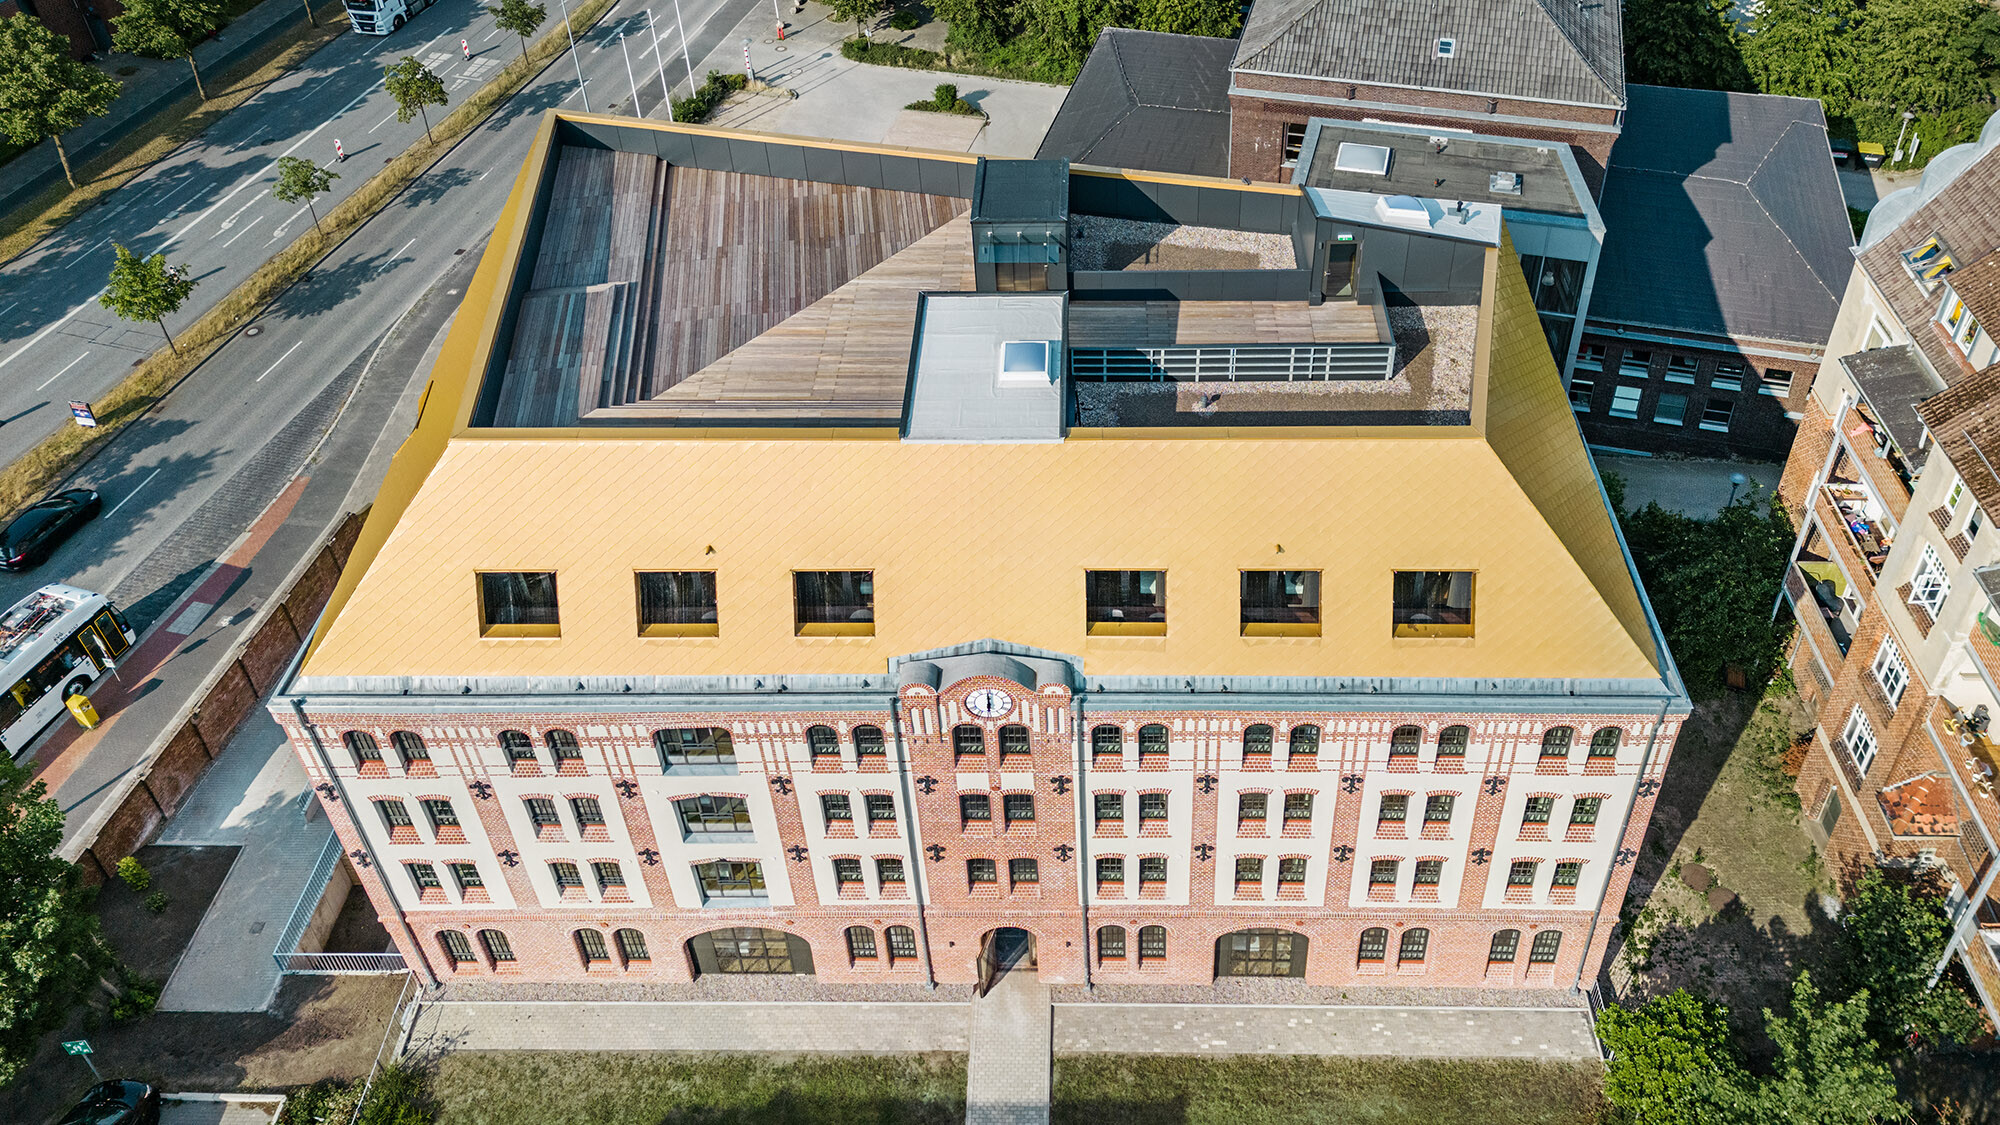 The house from a bird's eye view; the roof terrace, the new roof as well as the historic façade and built environment are in view.